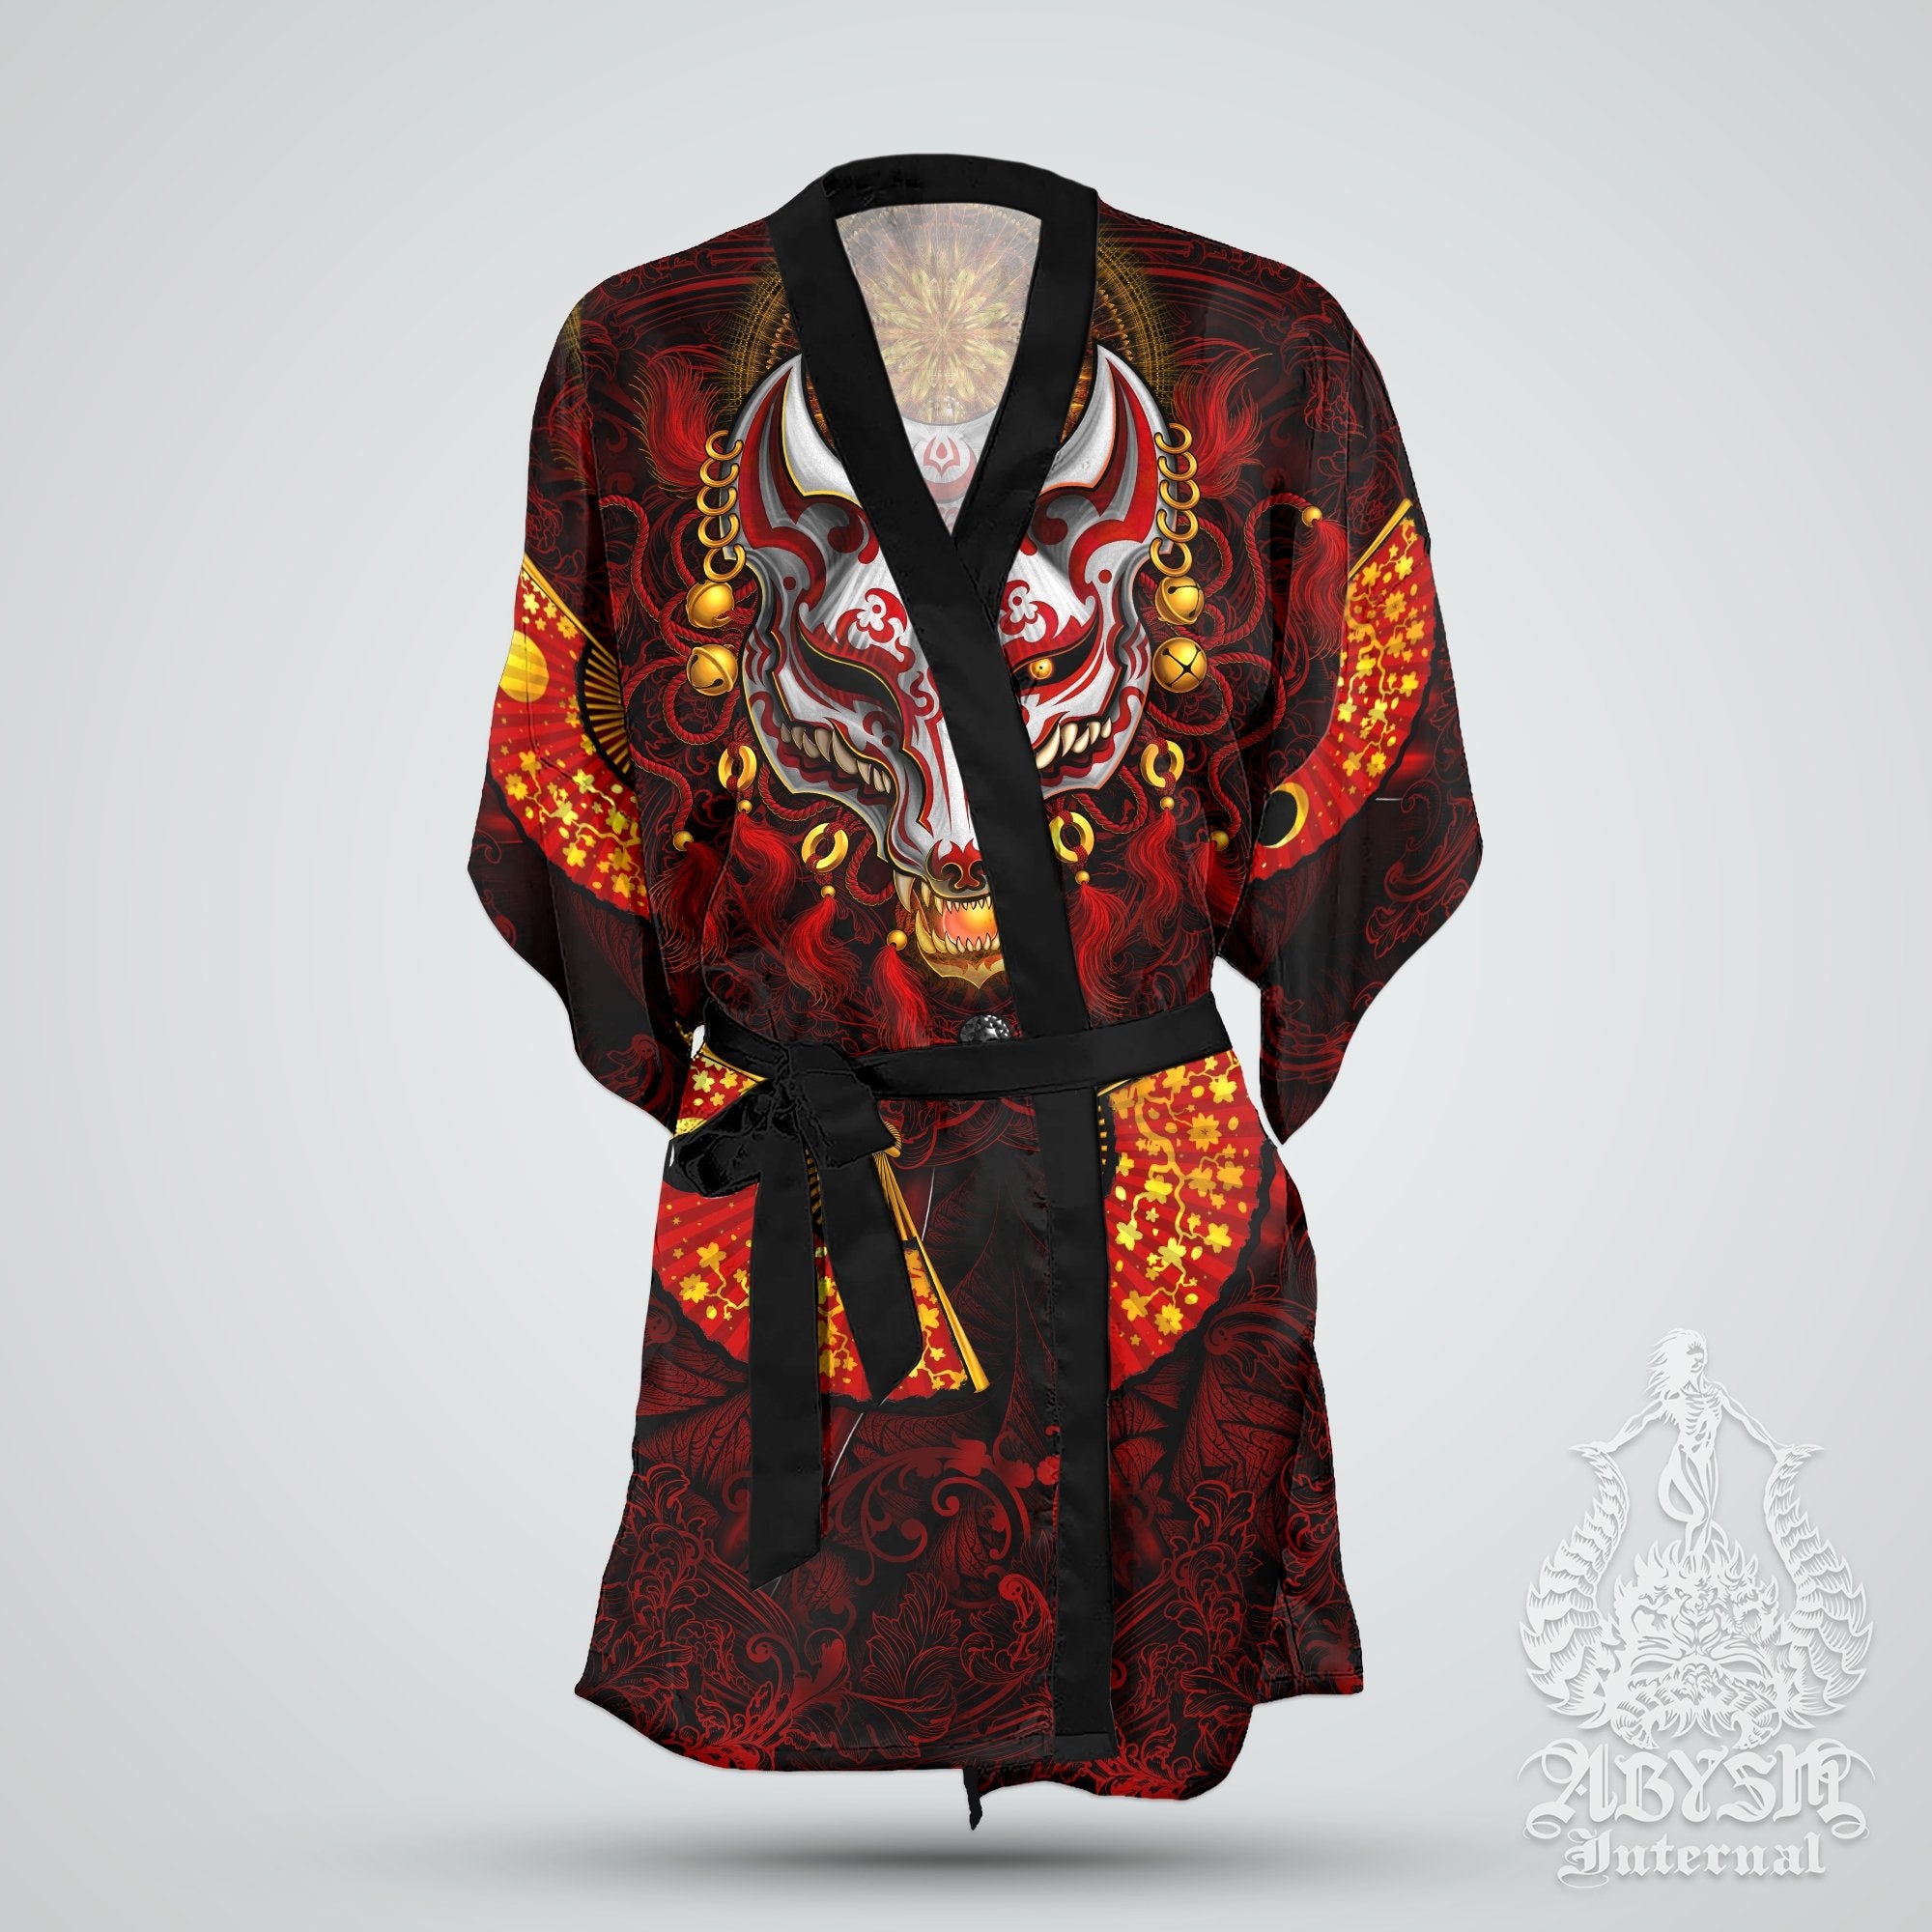 Kitsune Cover Up, Beach Outfit, Japanese Party Kimono, Summer Festival Robe, Indie and Alternative Clothing, Unisex - Fox Mask, Red White - Abysm Internal